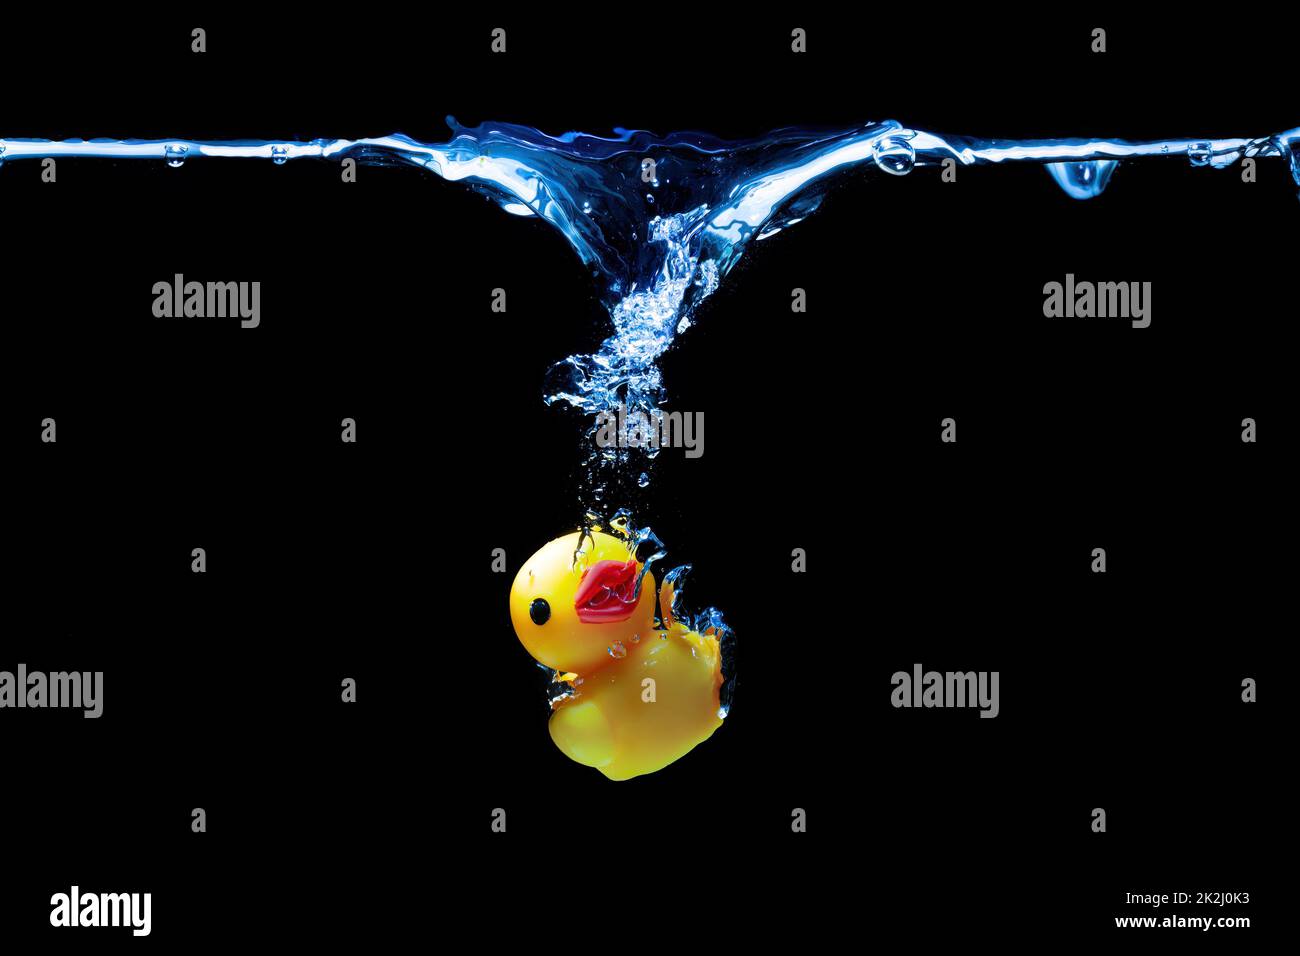 Small yellow toy duck sinking underwater isolated on black background. Stock Photo